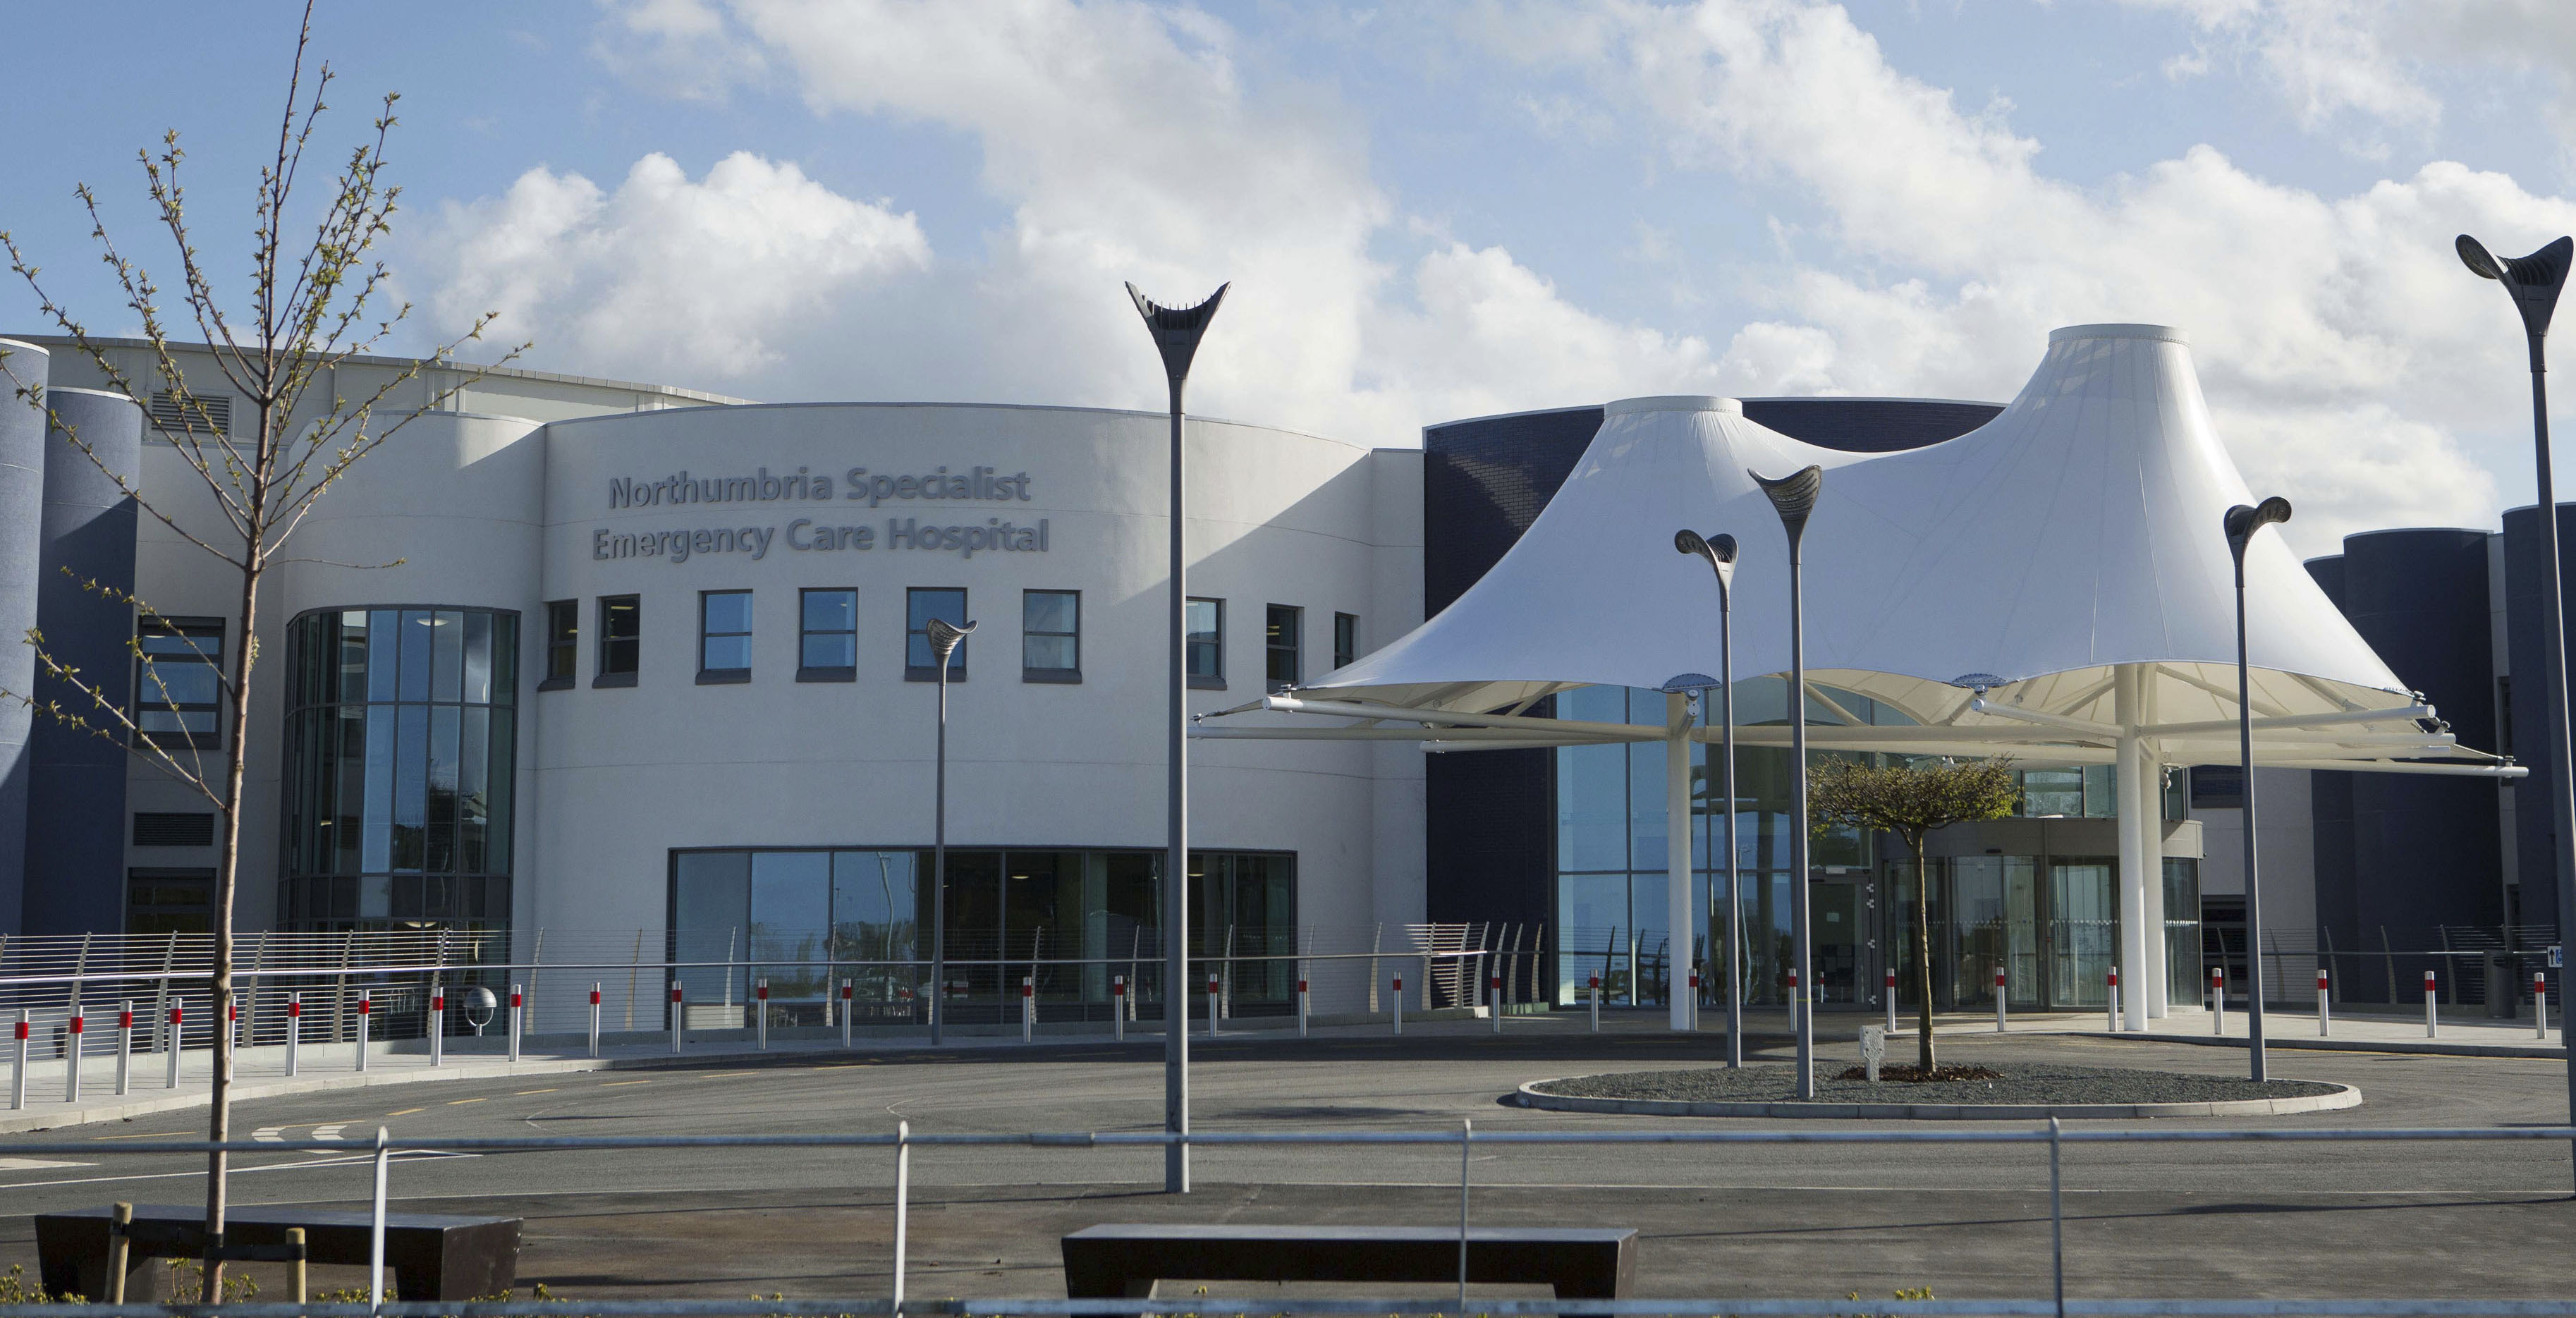 CEM secures new Northumbria specialist emergency care hospital